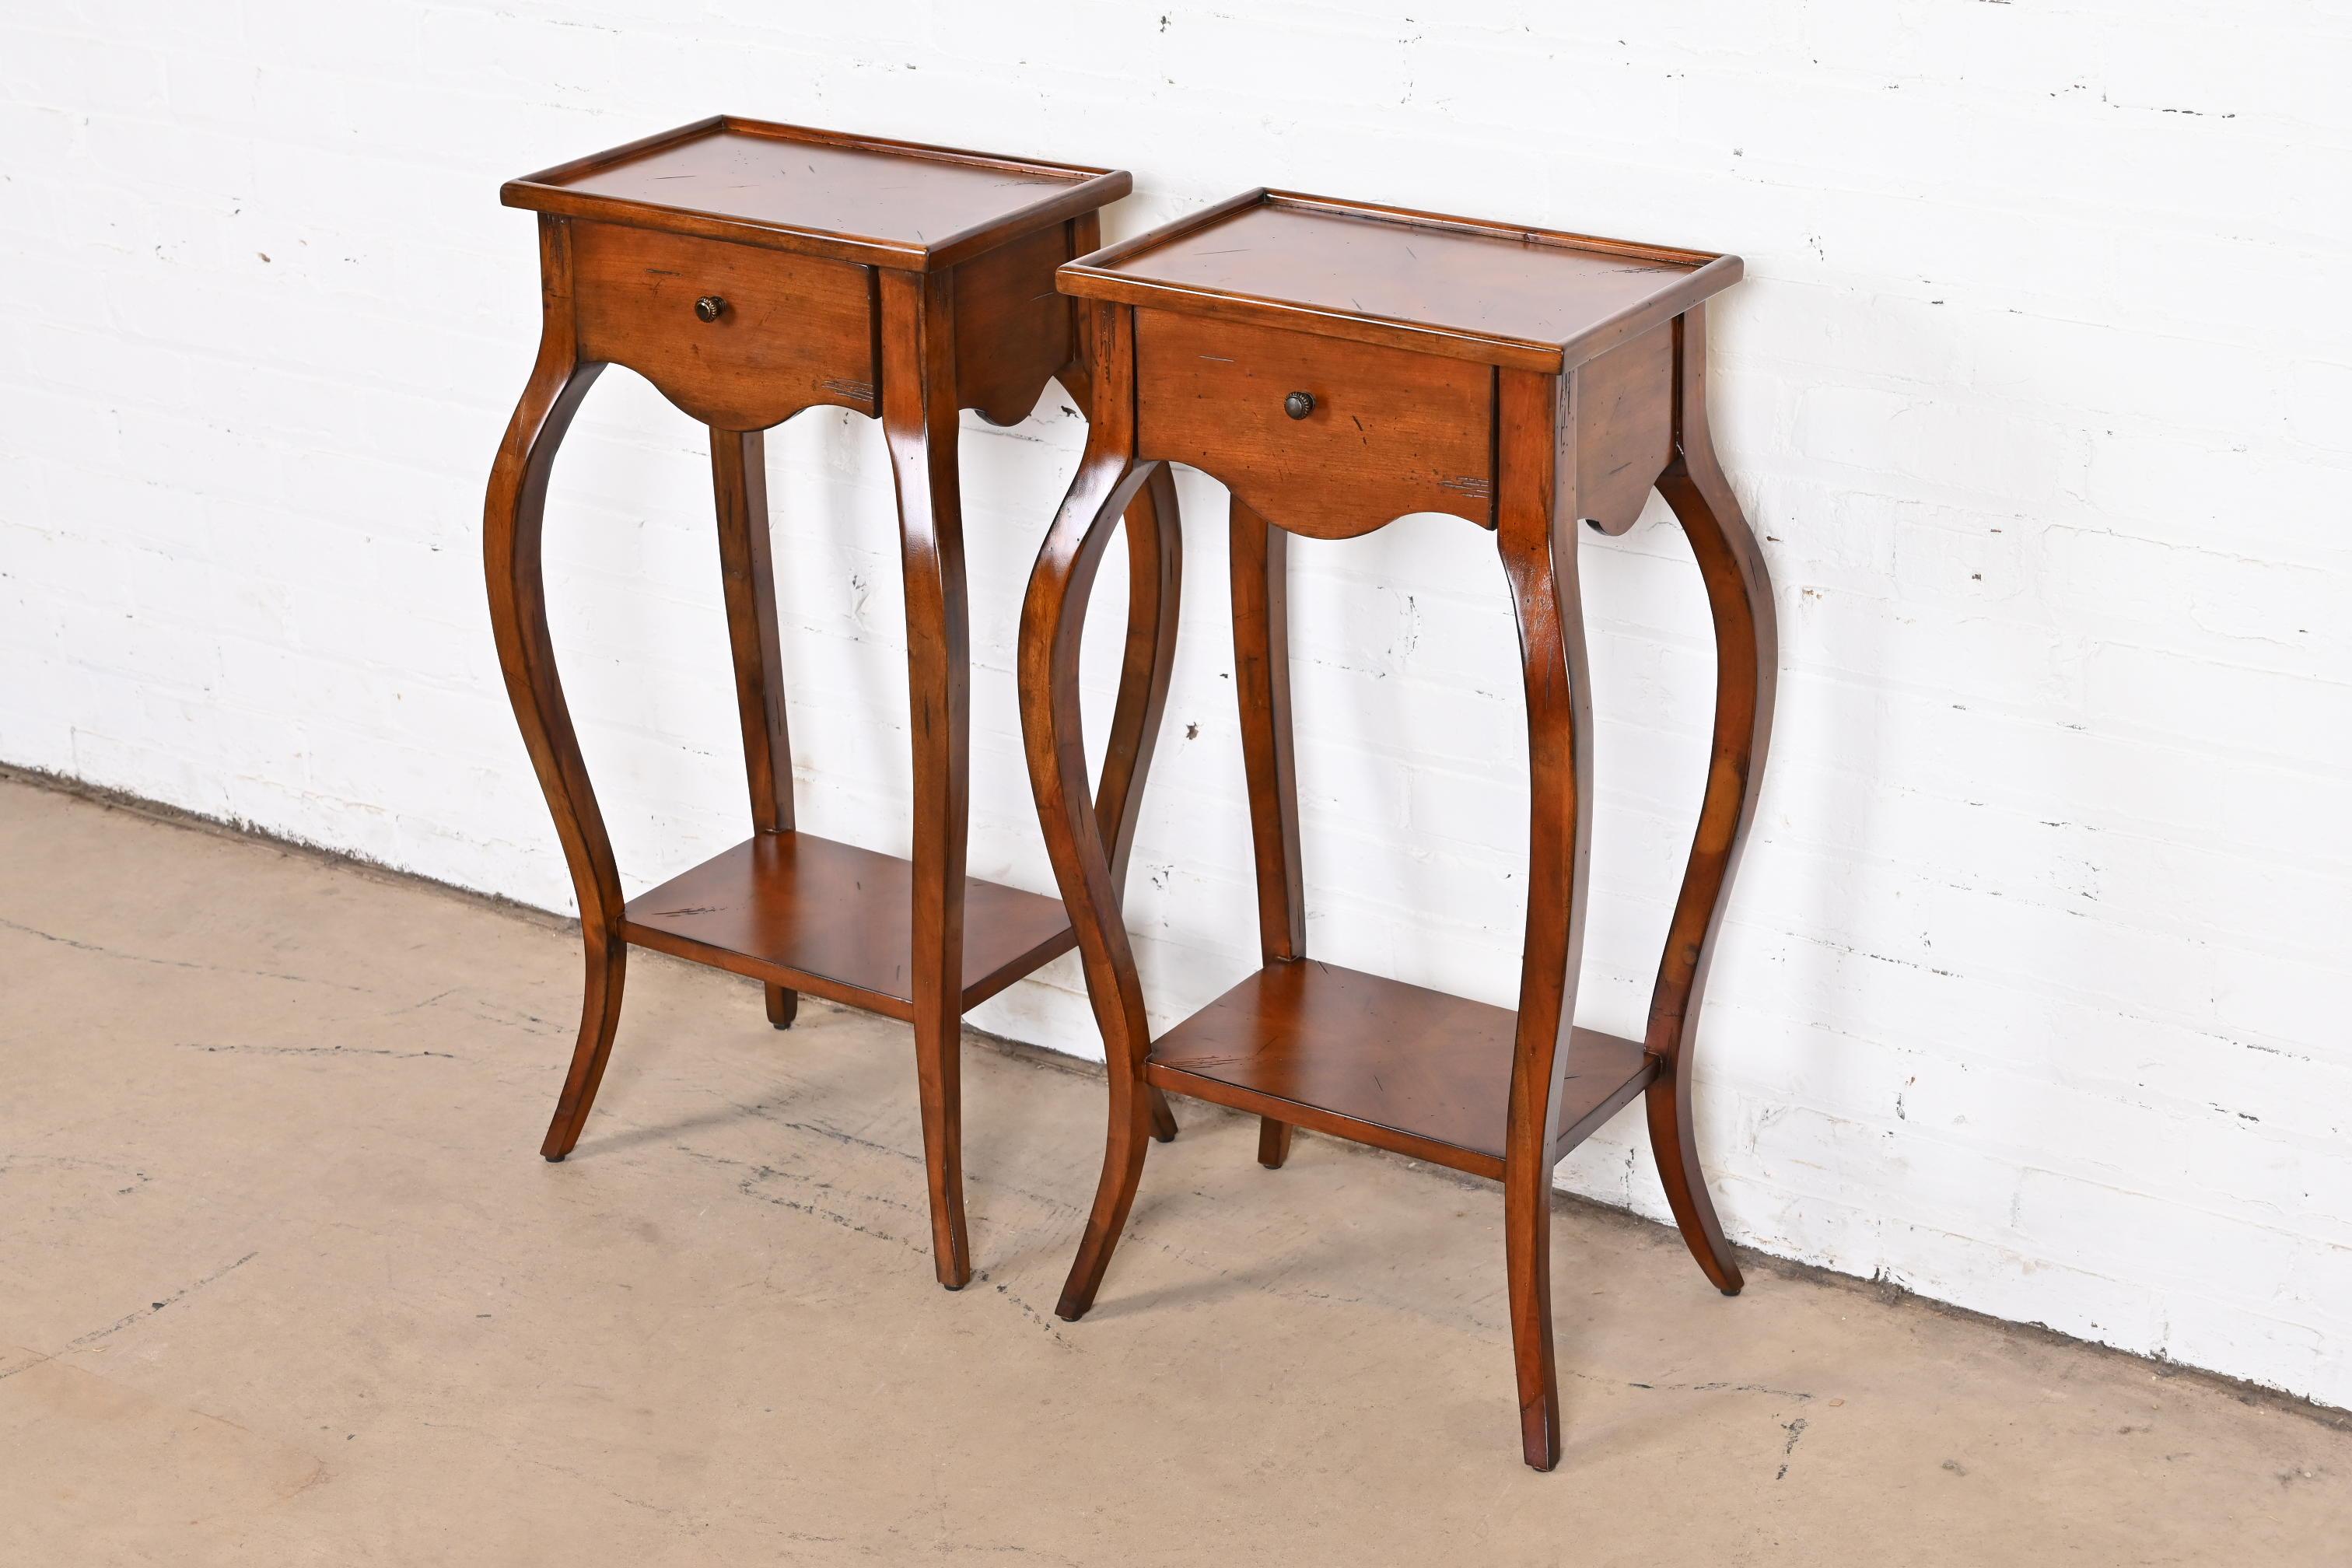 American Hekman French Provincial Cherry Wood Nightstands, Pair